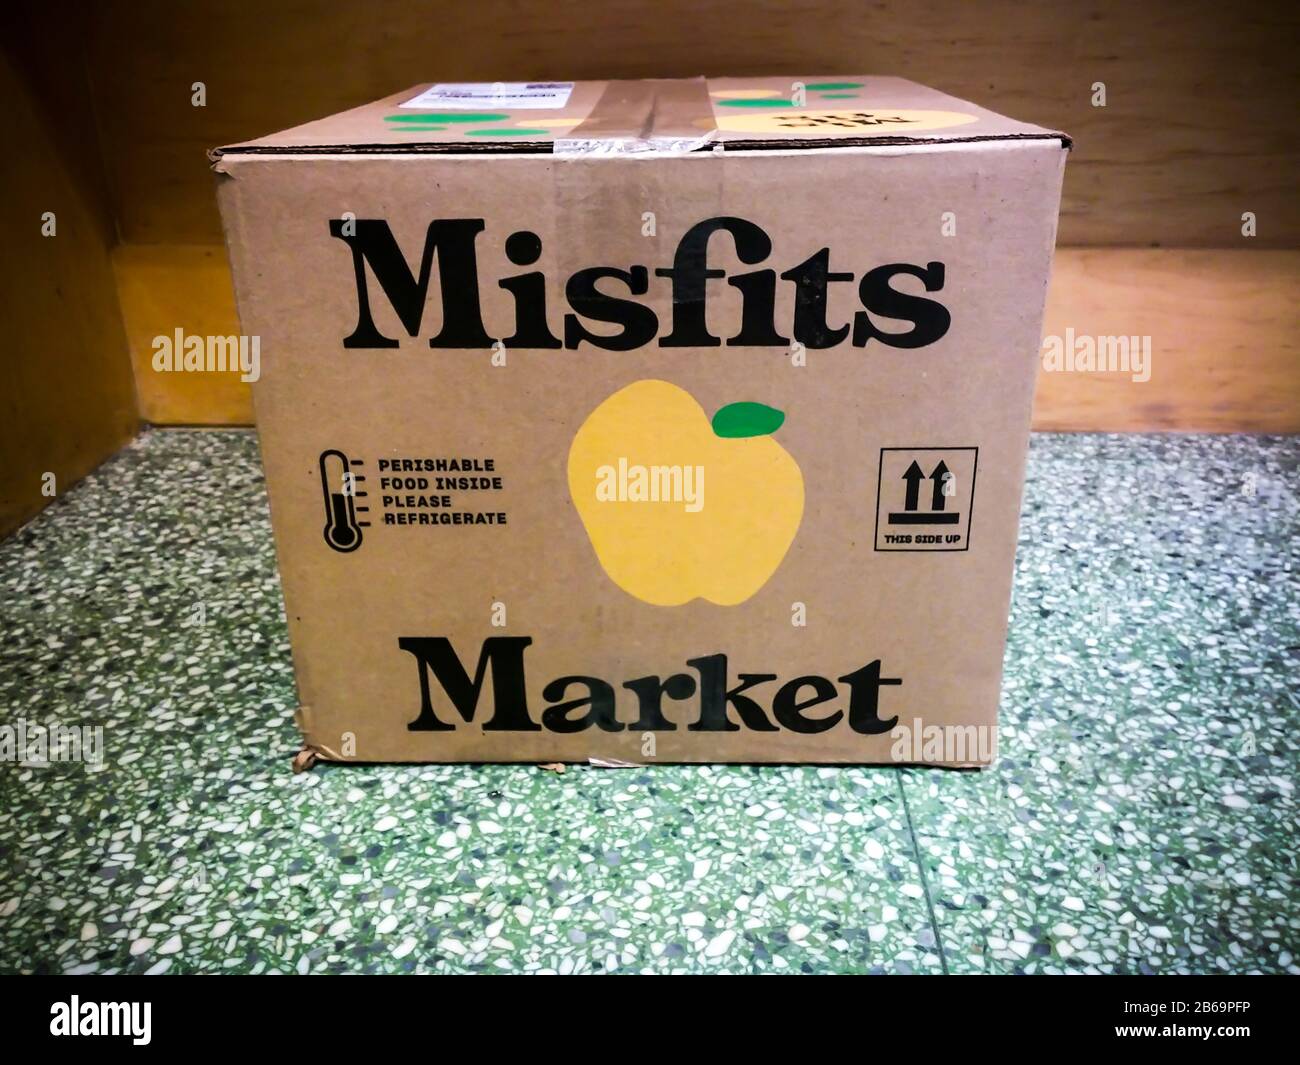 A delivery from Misfits in the lobby of apartment building in the Chelsea neighborhood of New York on Wednesday, March 4, 2020. Misfits is a food subscription service selling fruits and vegetables deemed too damaged or aesthetically unappealing by conventional distributors. (© Richard B. Levine) Stock Photo